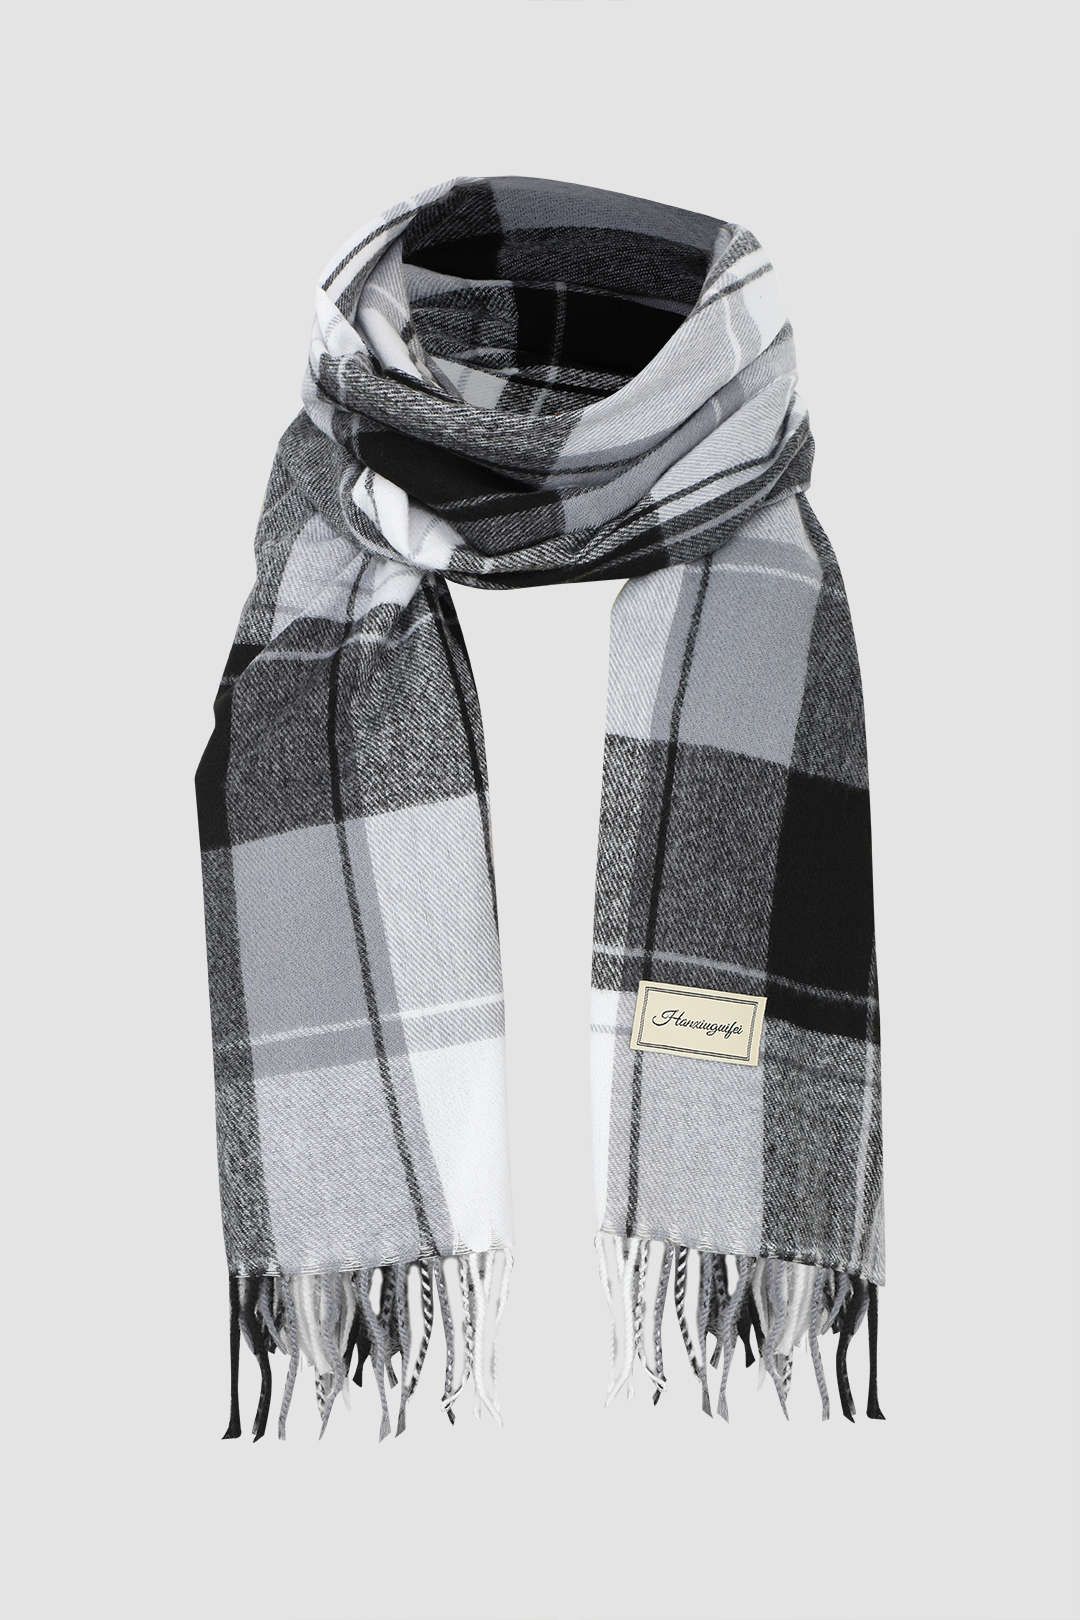 Checked Pattern Fringe Scarf